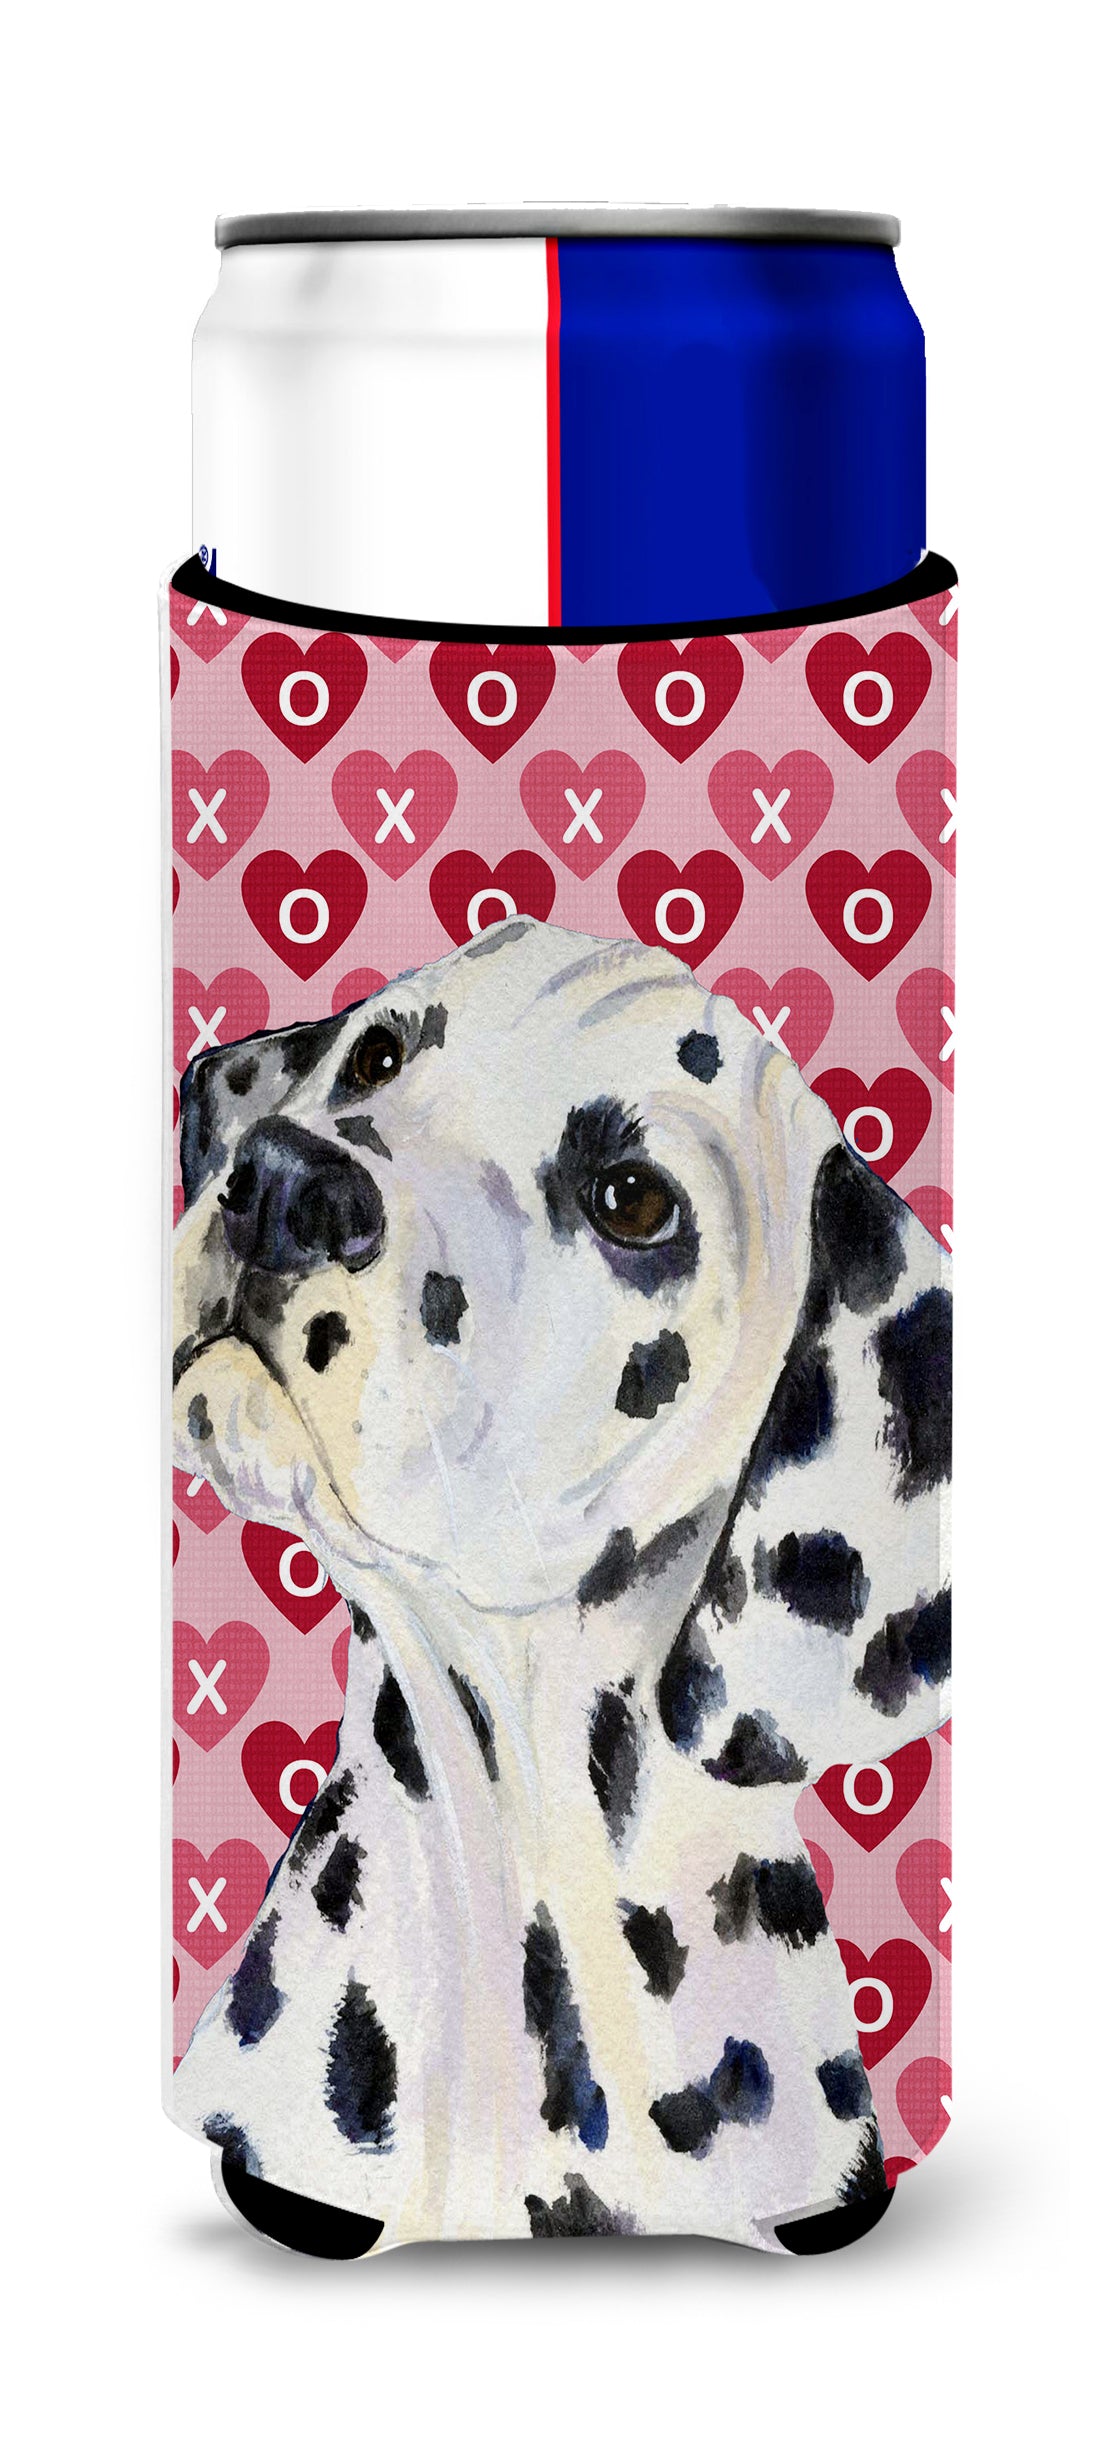 Dalmatian Hearts Love and Valentine's Day Portrait Ultra Beverage Insulators for slim cans SS4492MUK